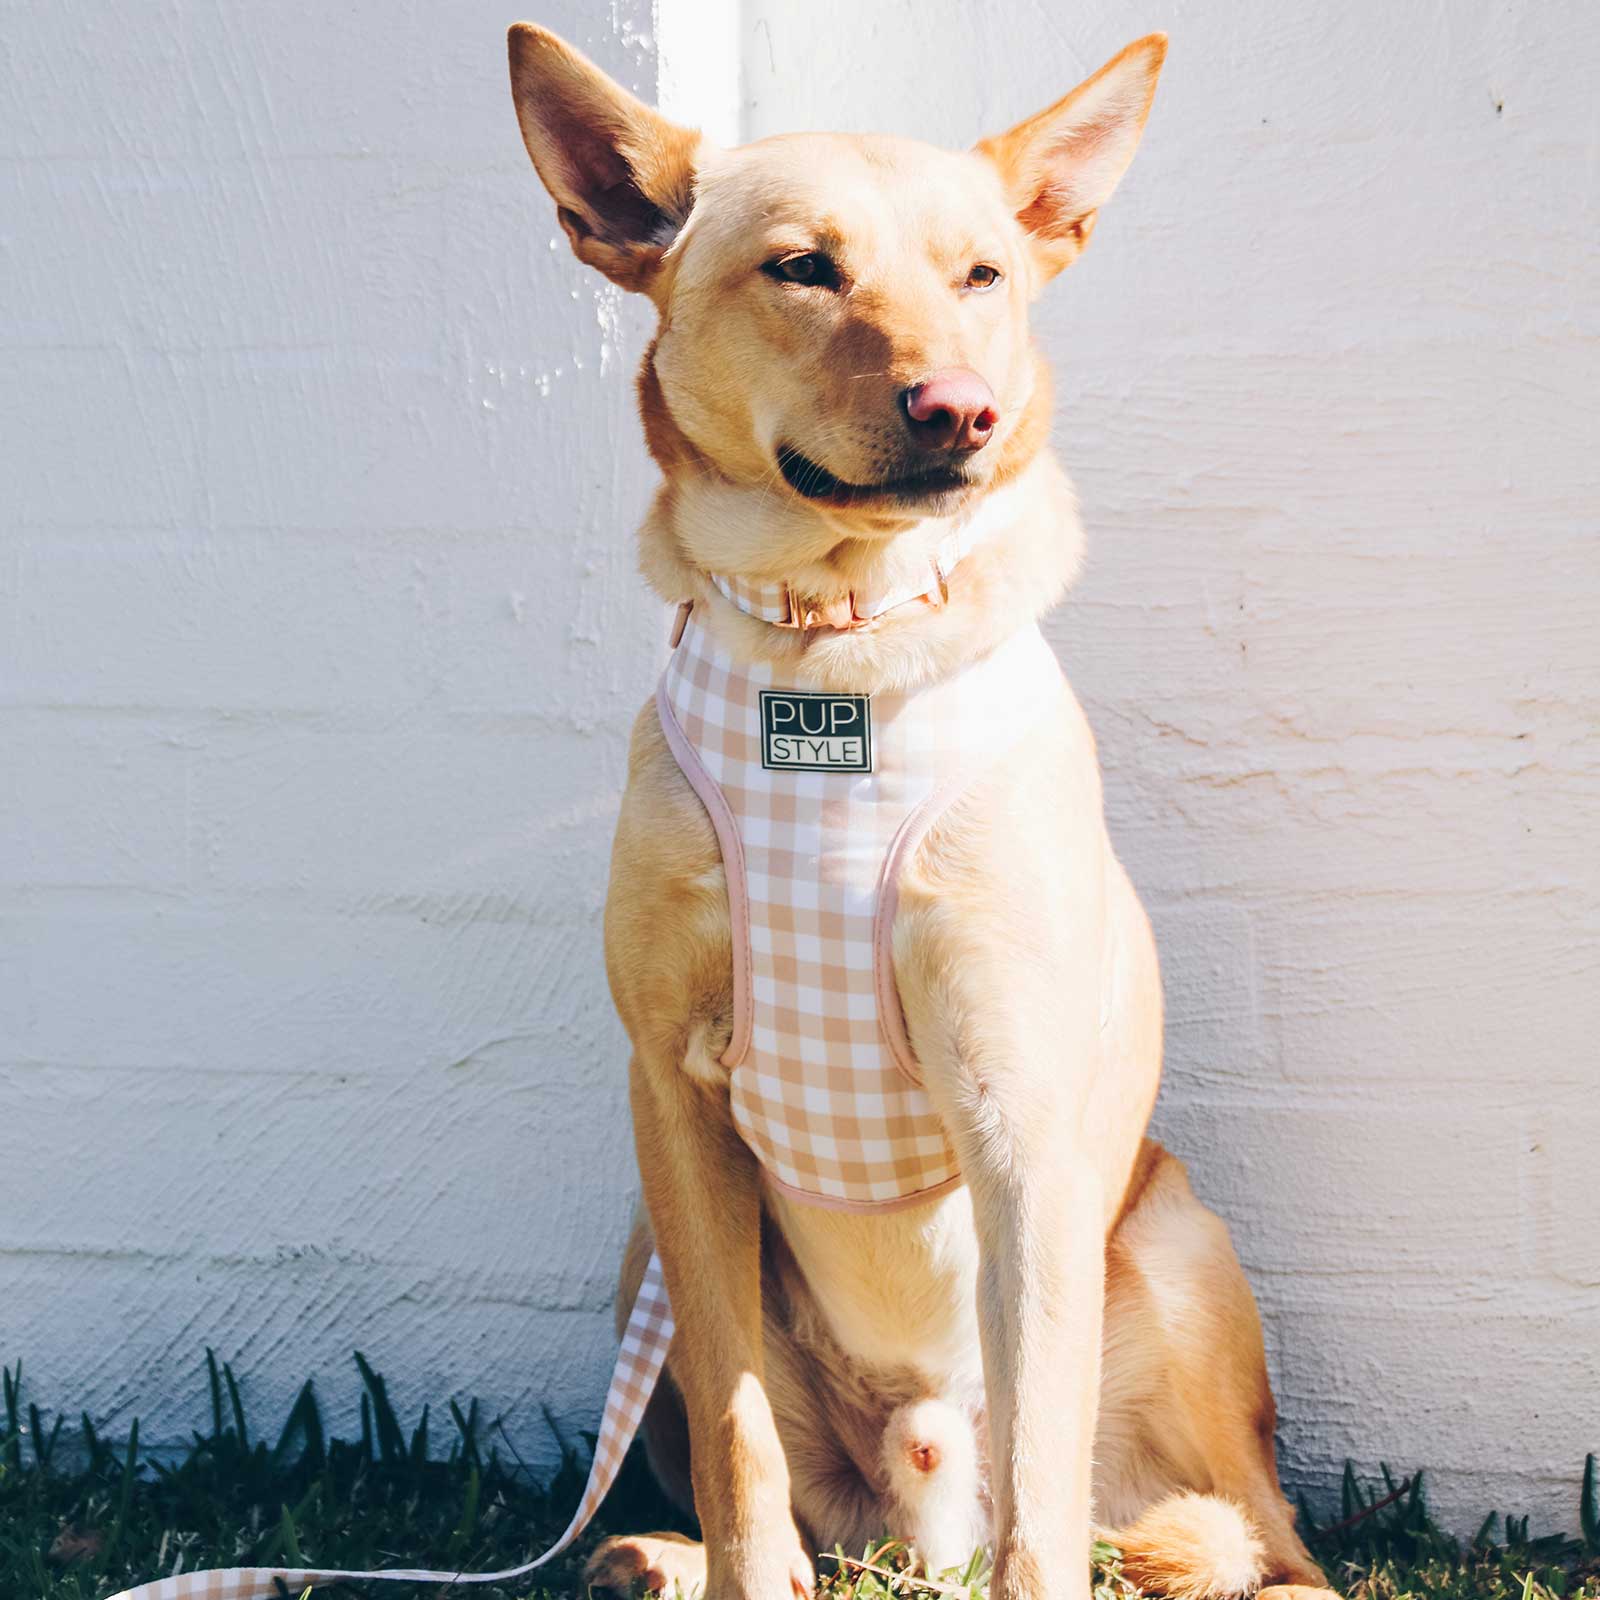 Pupstyle Dog Harness Creme Brulee